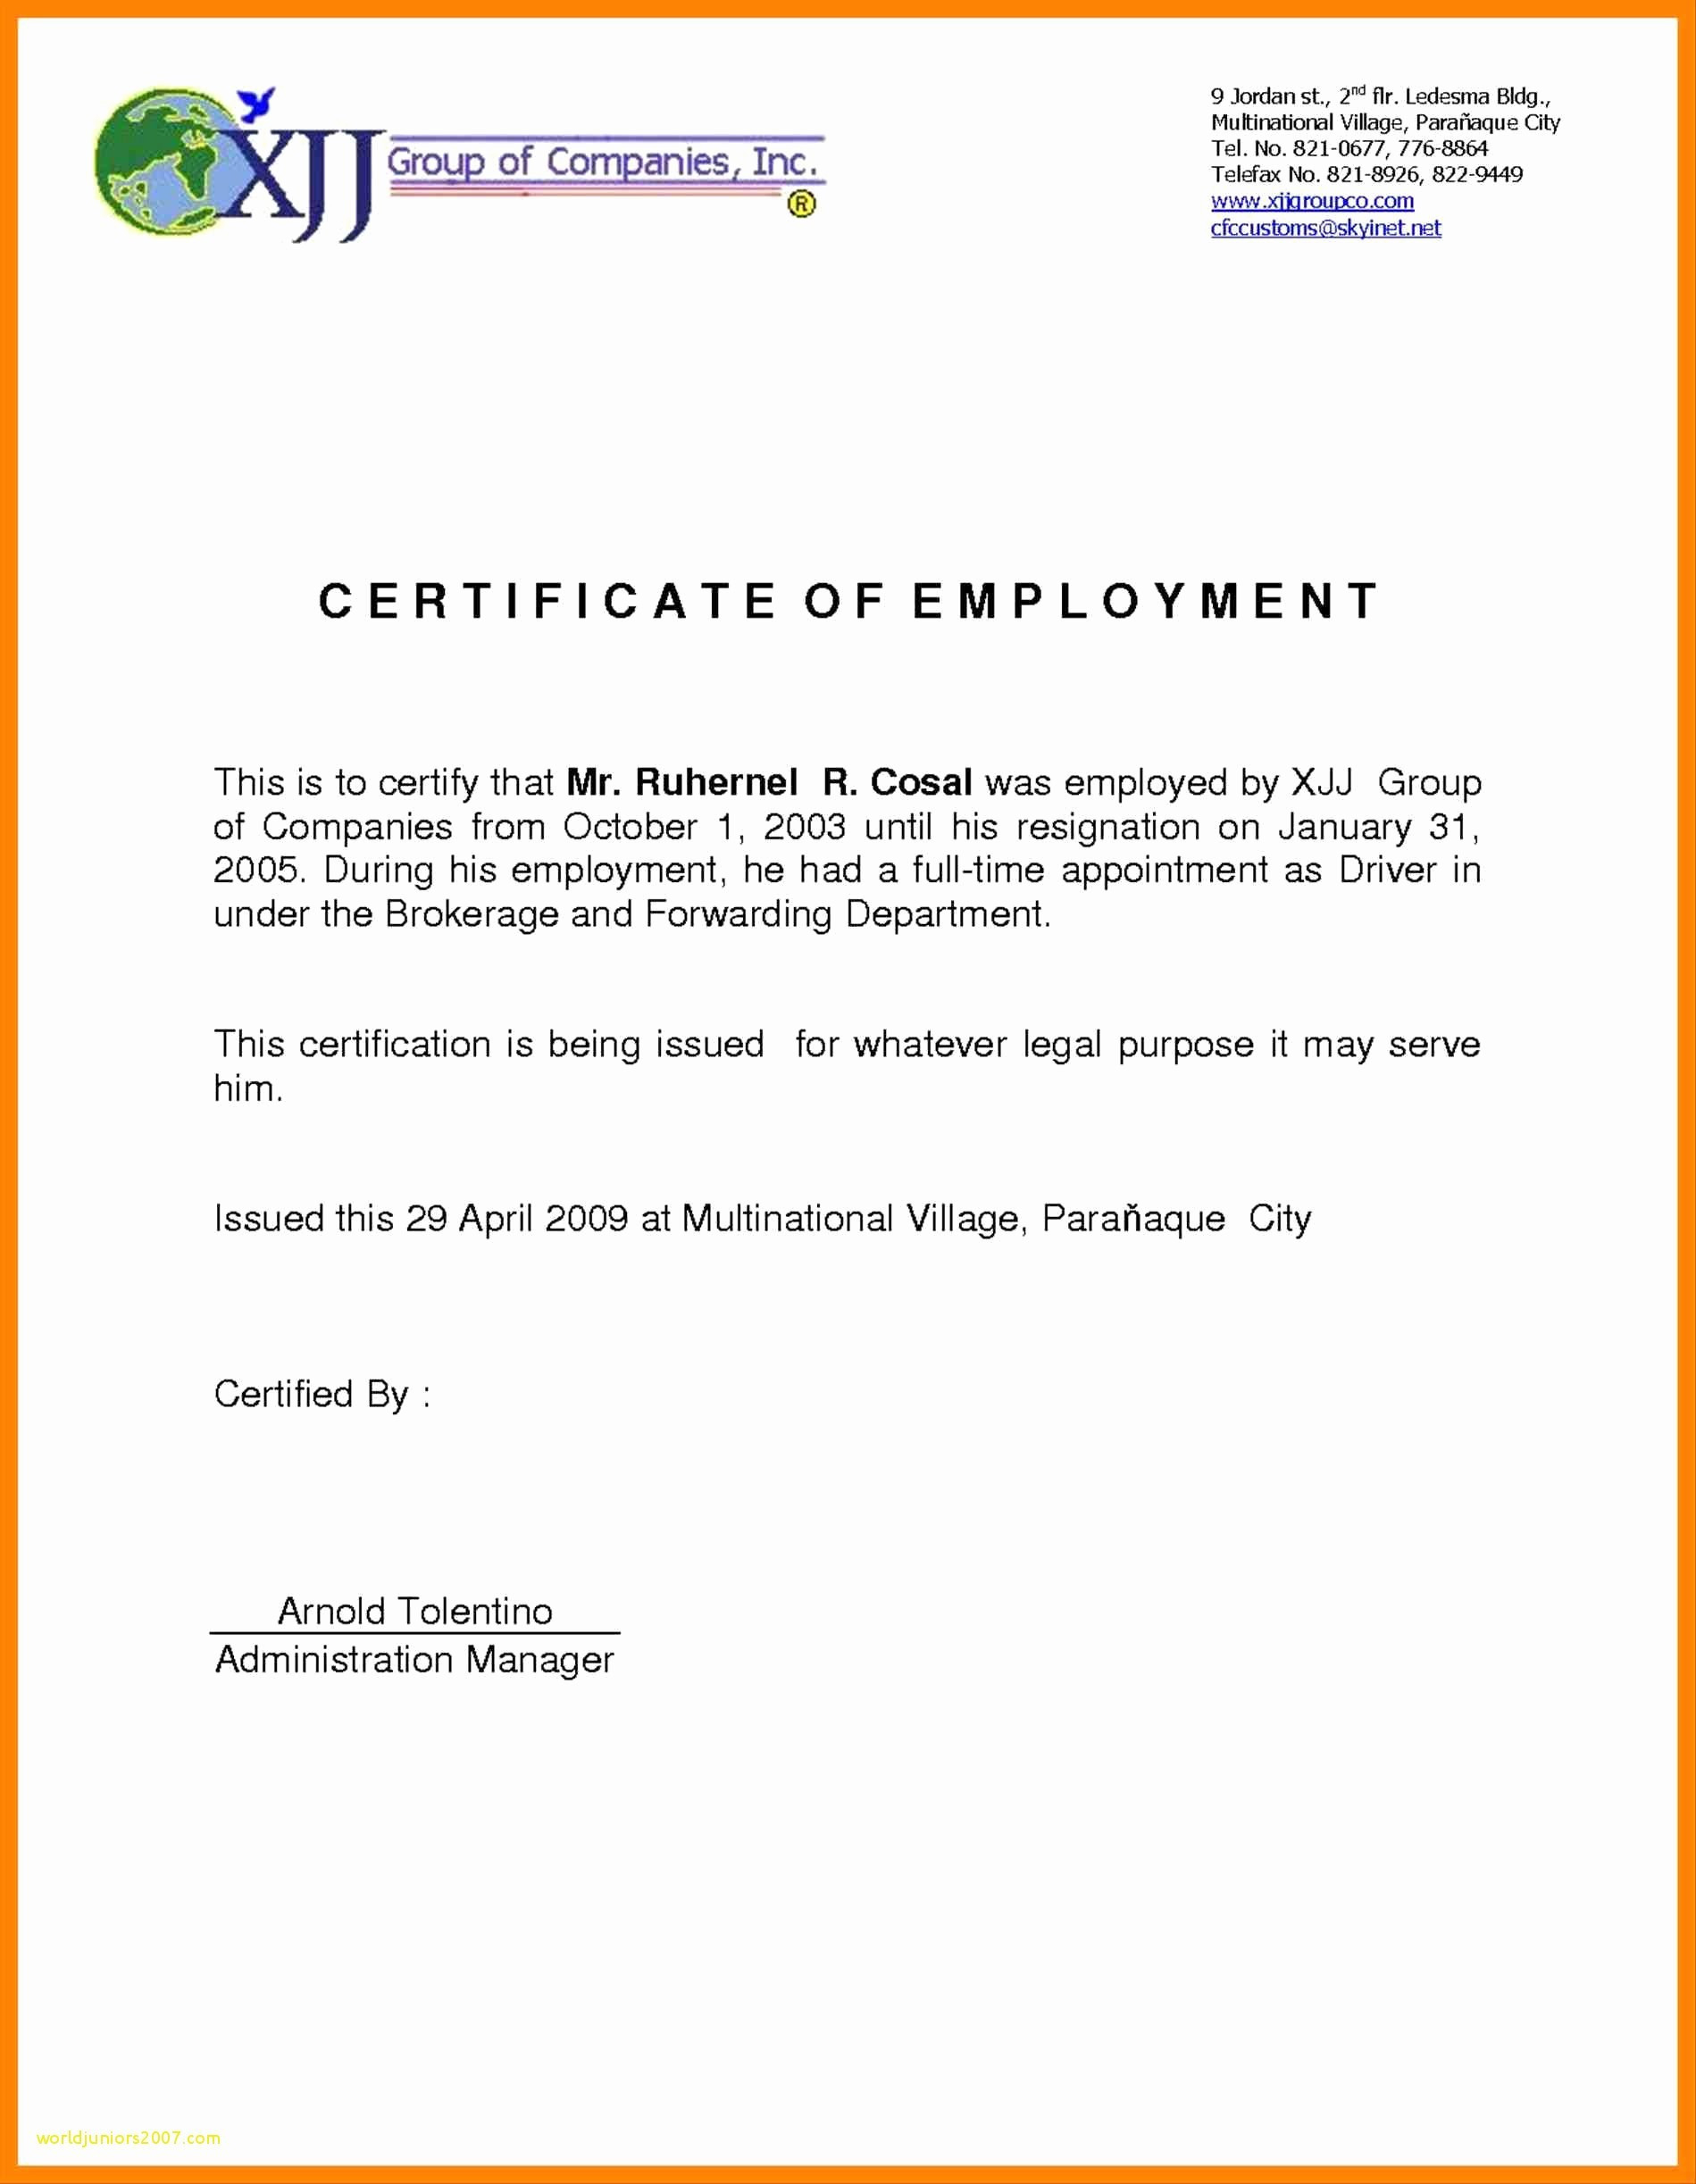 042 Online Certificates For Jobs Fresh Job Fer Letter Format Pertaining To Template Of Certificate Of Employment